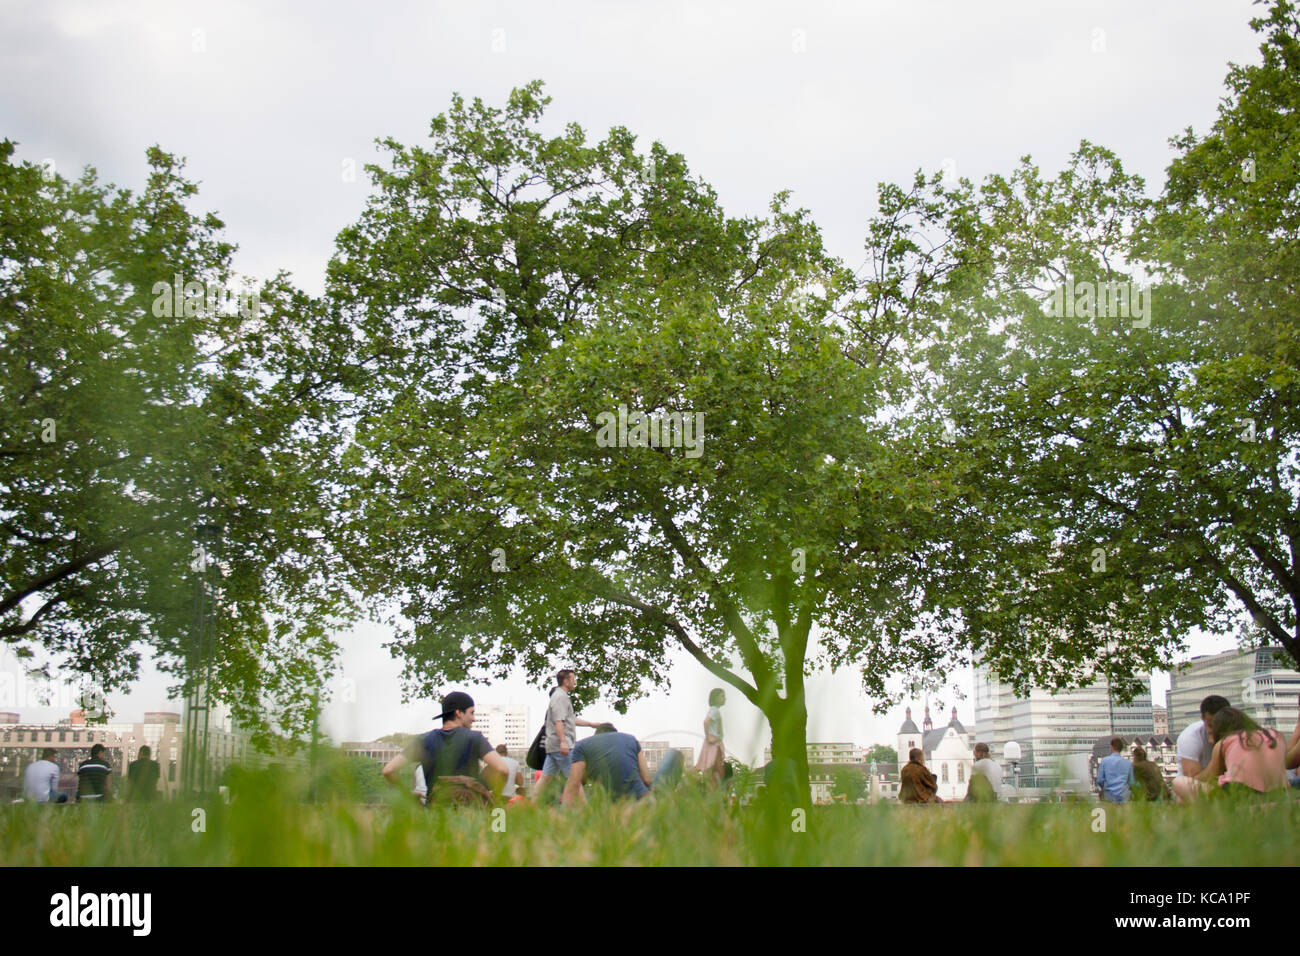 Cologne rhine, people chilling under trees. very low point of view Stock Photo